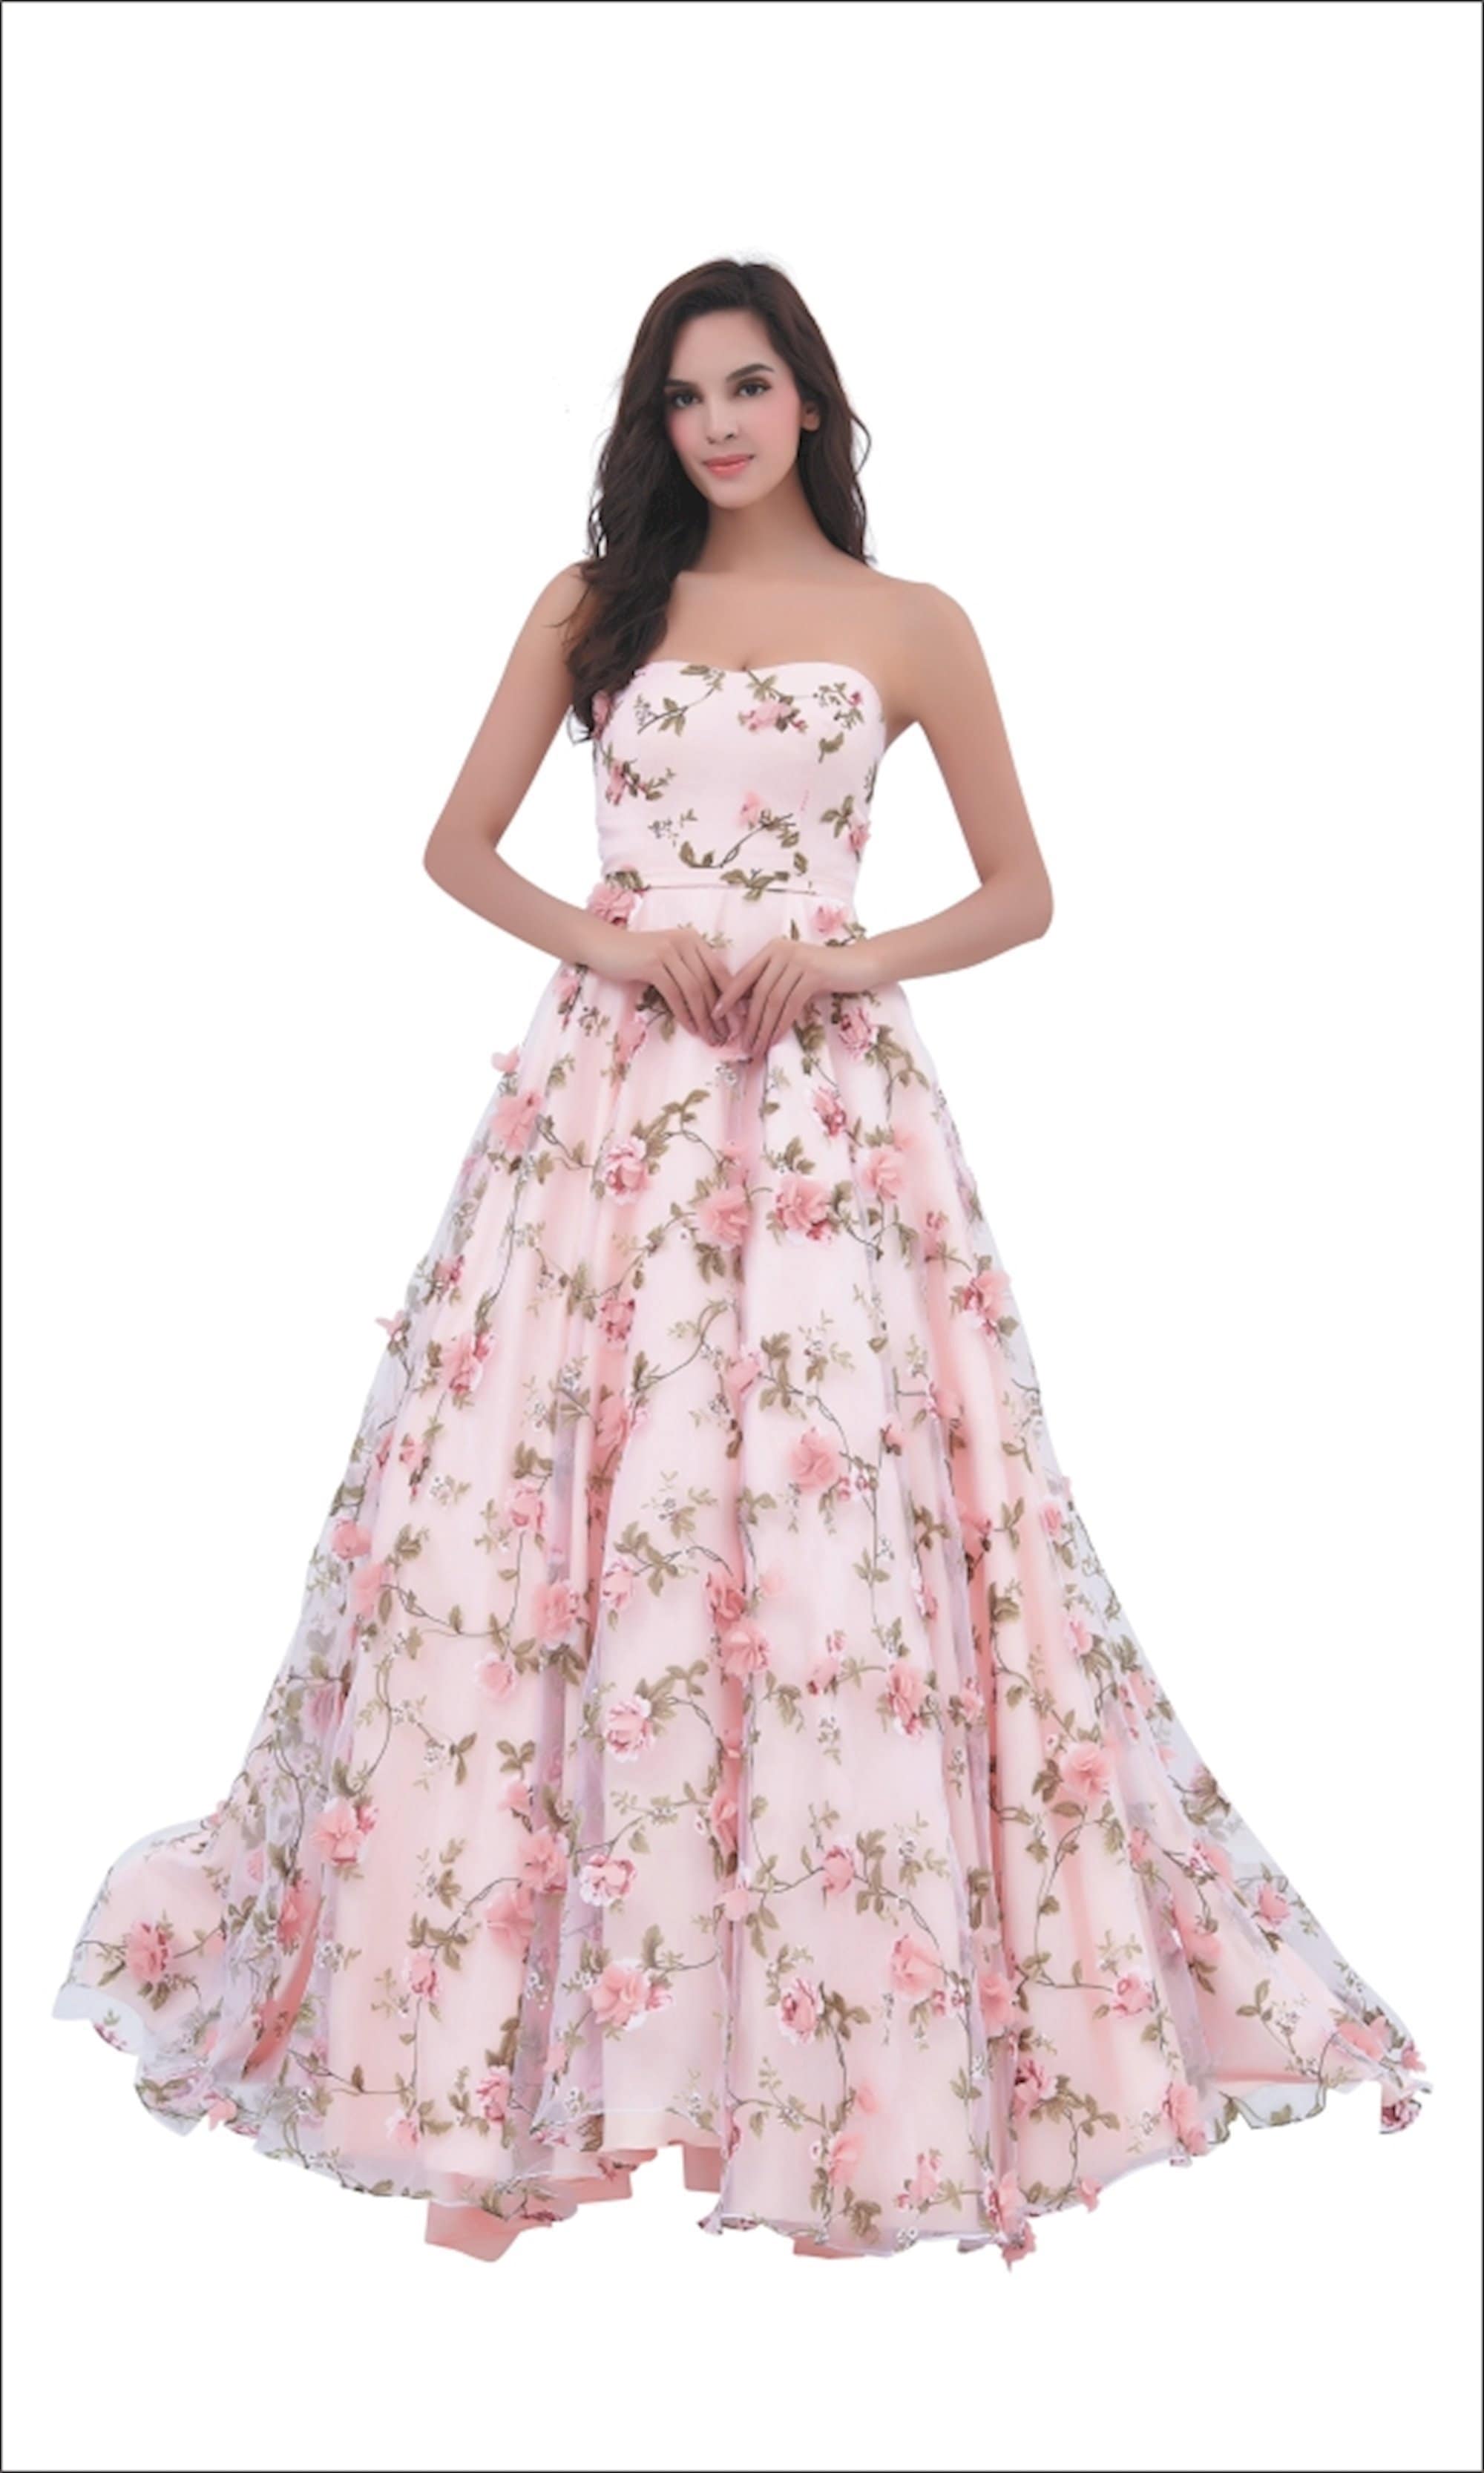 J'Adore Dresses - J11343 Floral Print Strapless Embroidered Tulle Ballgown
